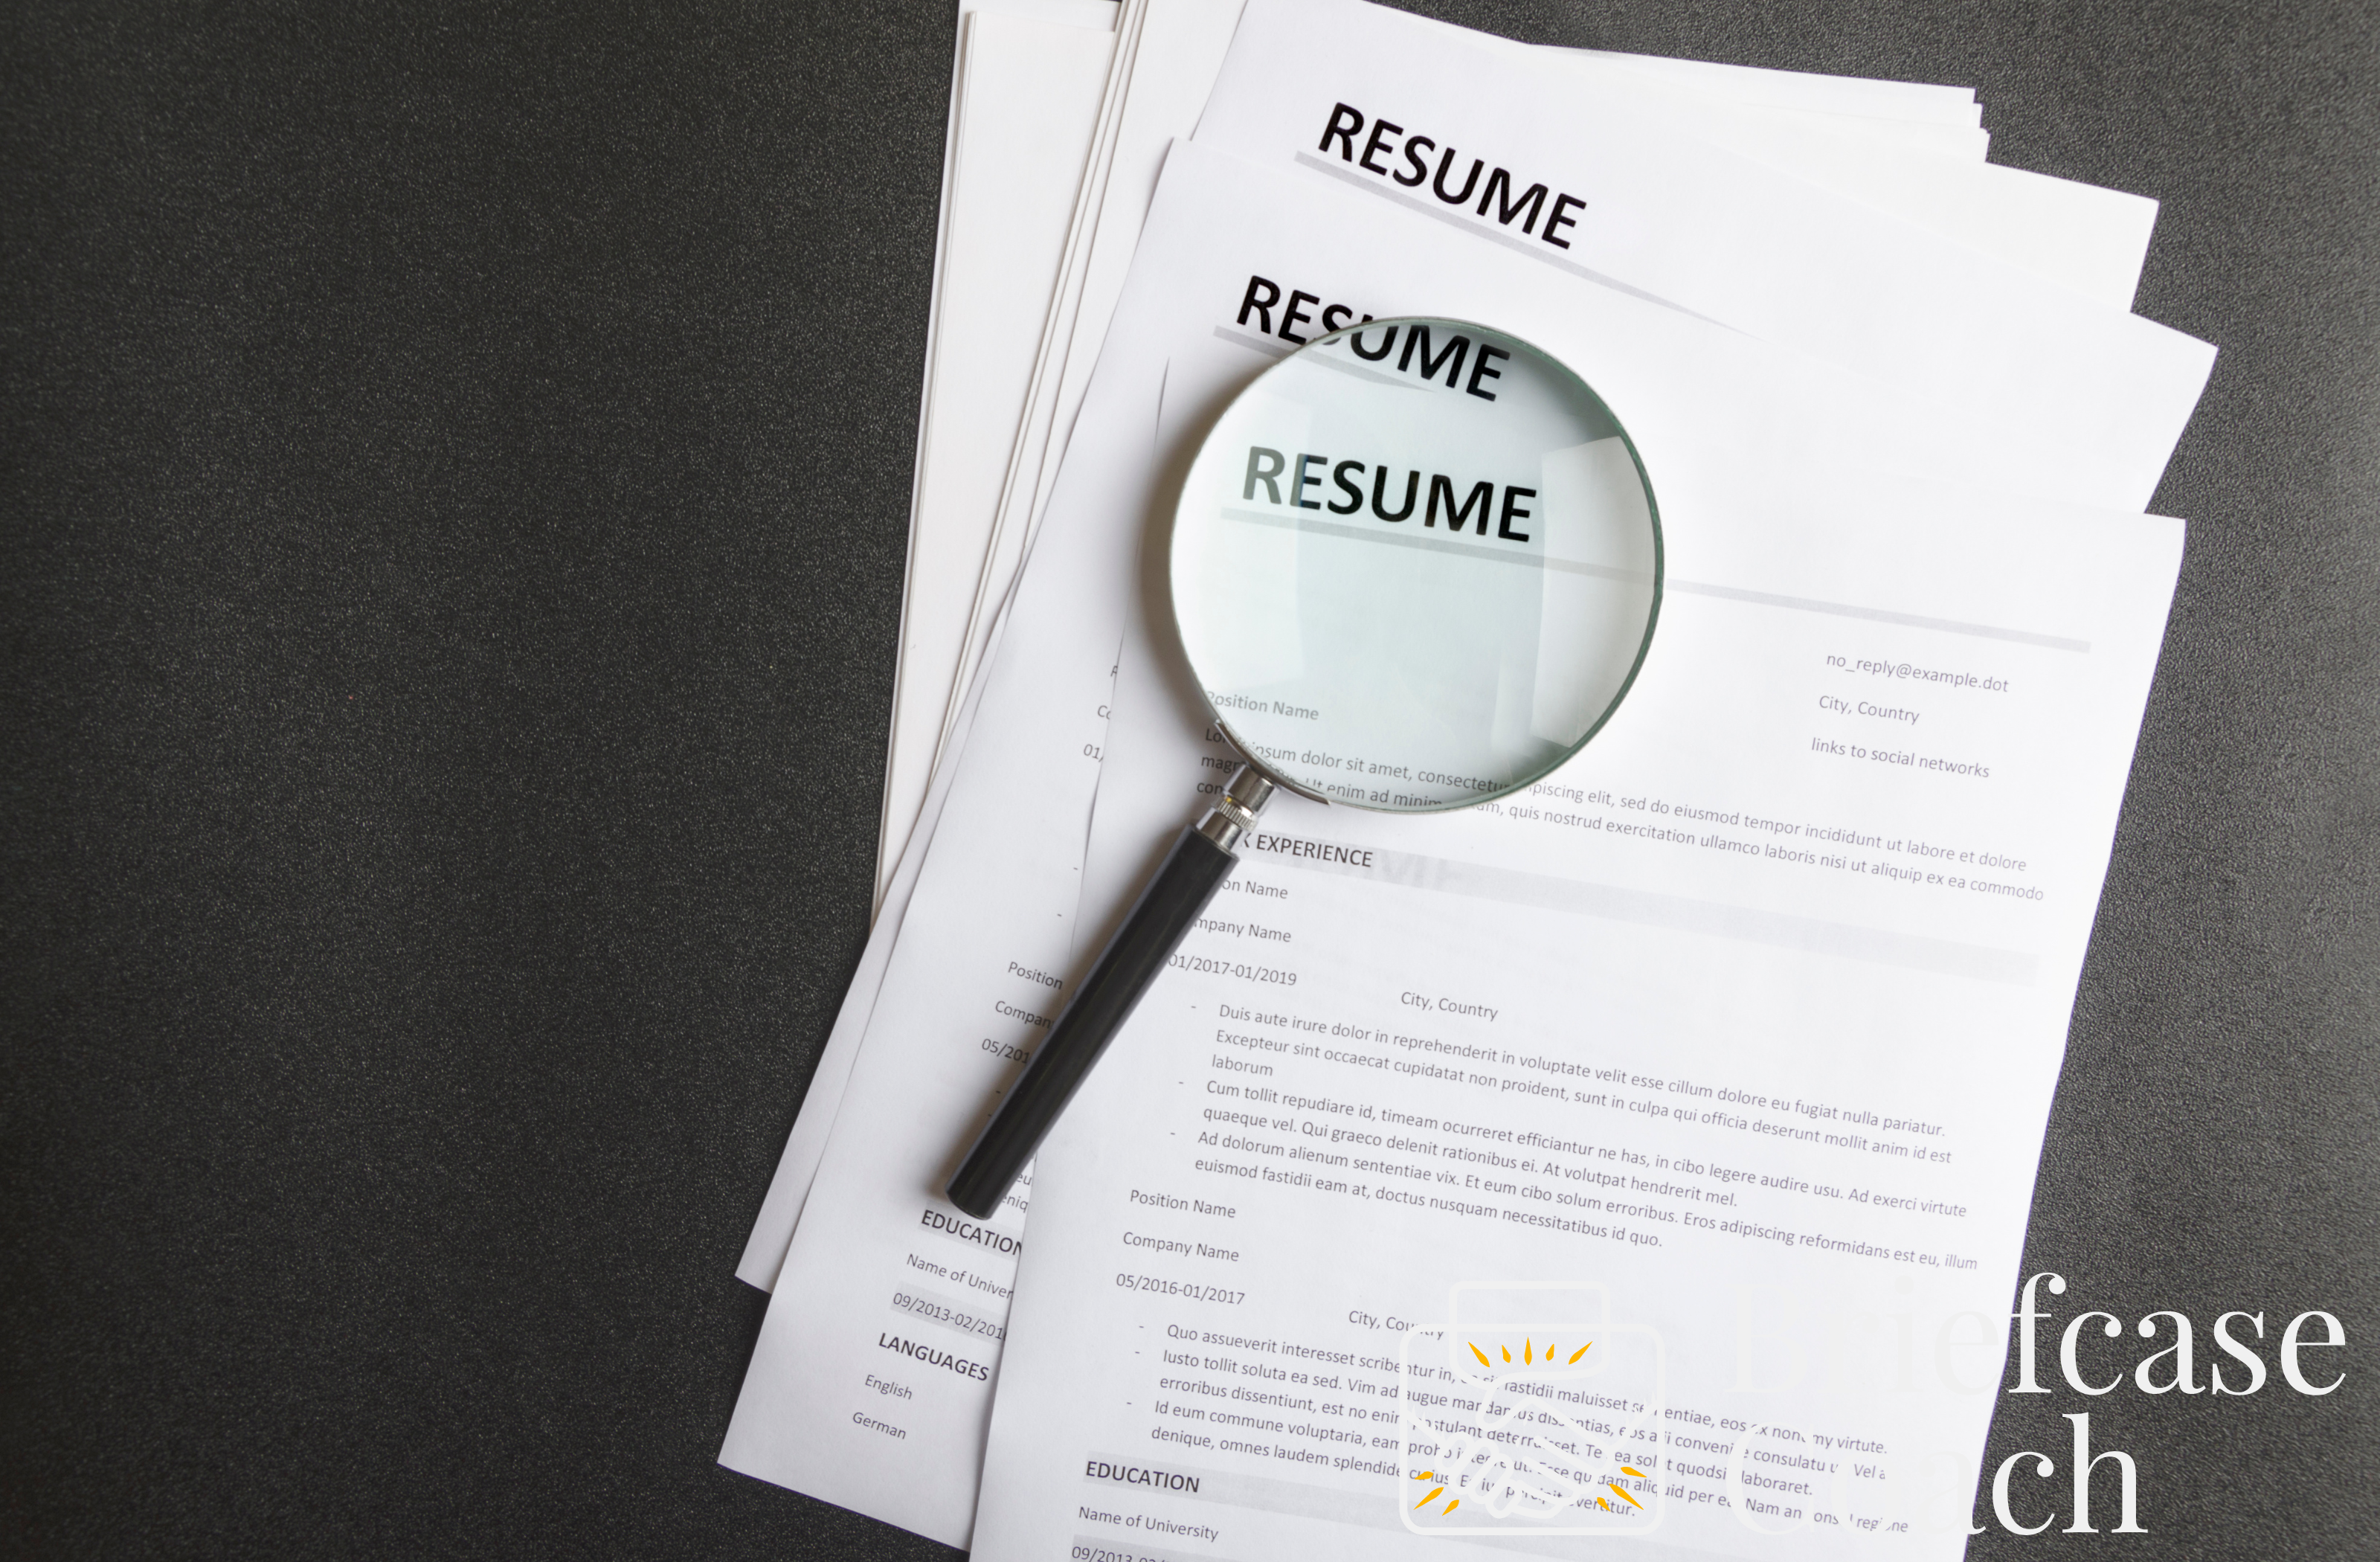 5 reasons non-job seekers should have a resume